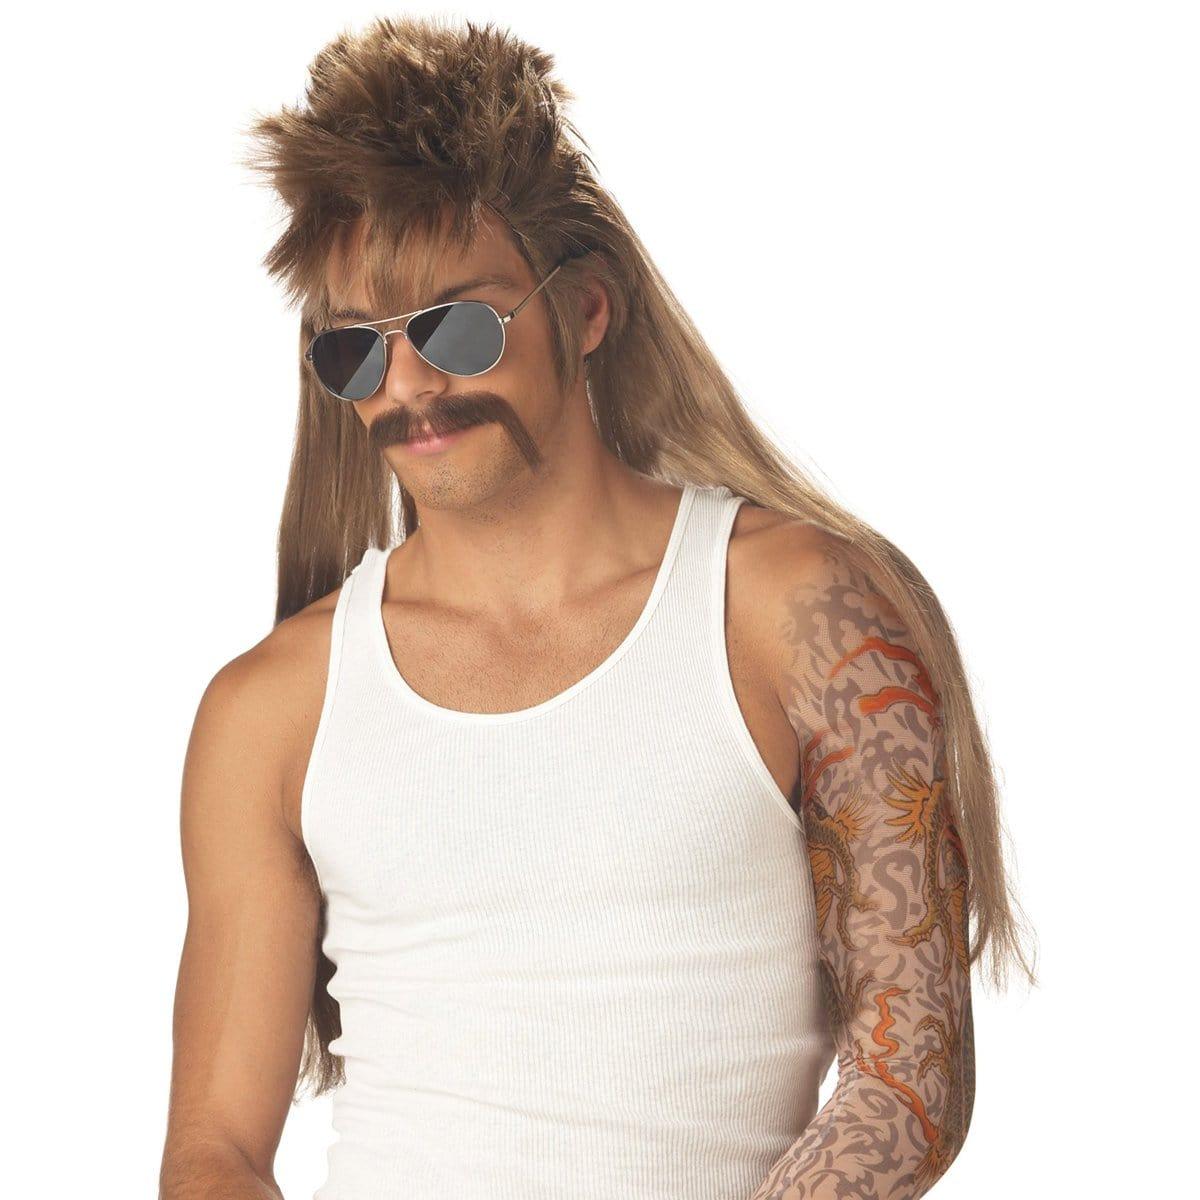 Buy Costume Accessories Mississippi mudflap wig & mustache set for men sold at Party Expert